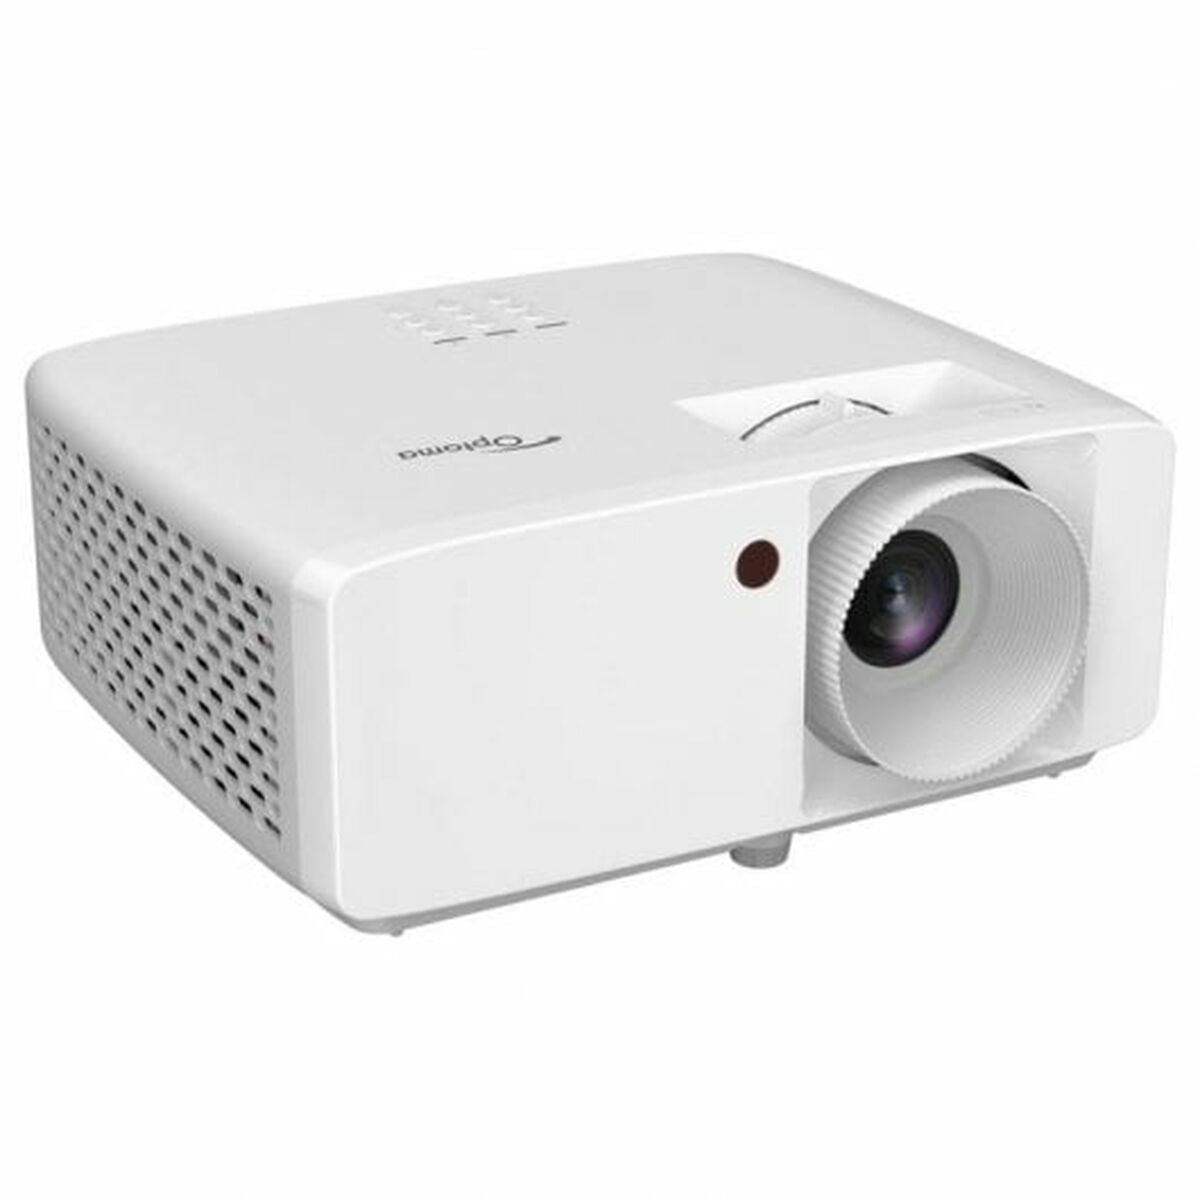 Projector Optoma Full HD 1920 x 1080 px, Optoma, Electronics, TV, Video and home cinema, projector-optoma-full-hd-1920-x-1080-px, Brand_Optoma, category-reference-2609, category-reference-2642, category-reference-2947, category-reference-t-18805, category-reference-t-18811, category-reference-t-19653, cinema and television, computers / peripherals, Condition_NEW, entertainment, office, Price_+ 1000, RiotNook